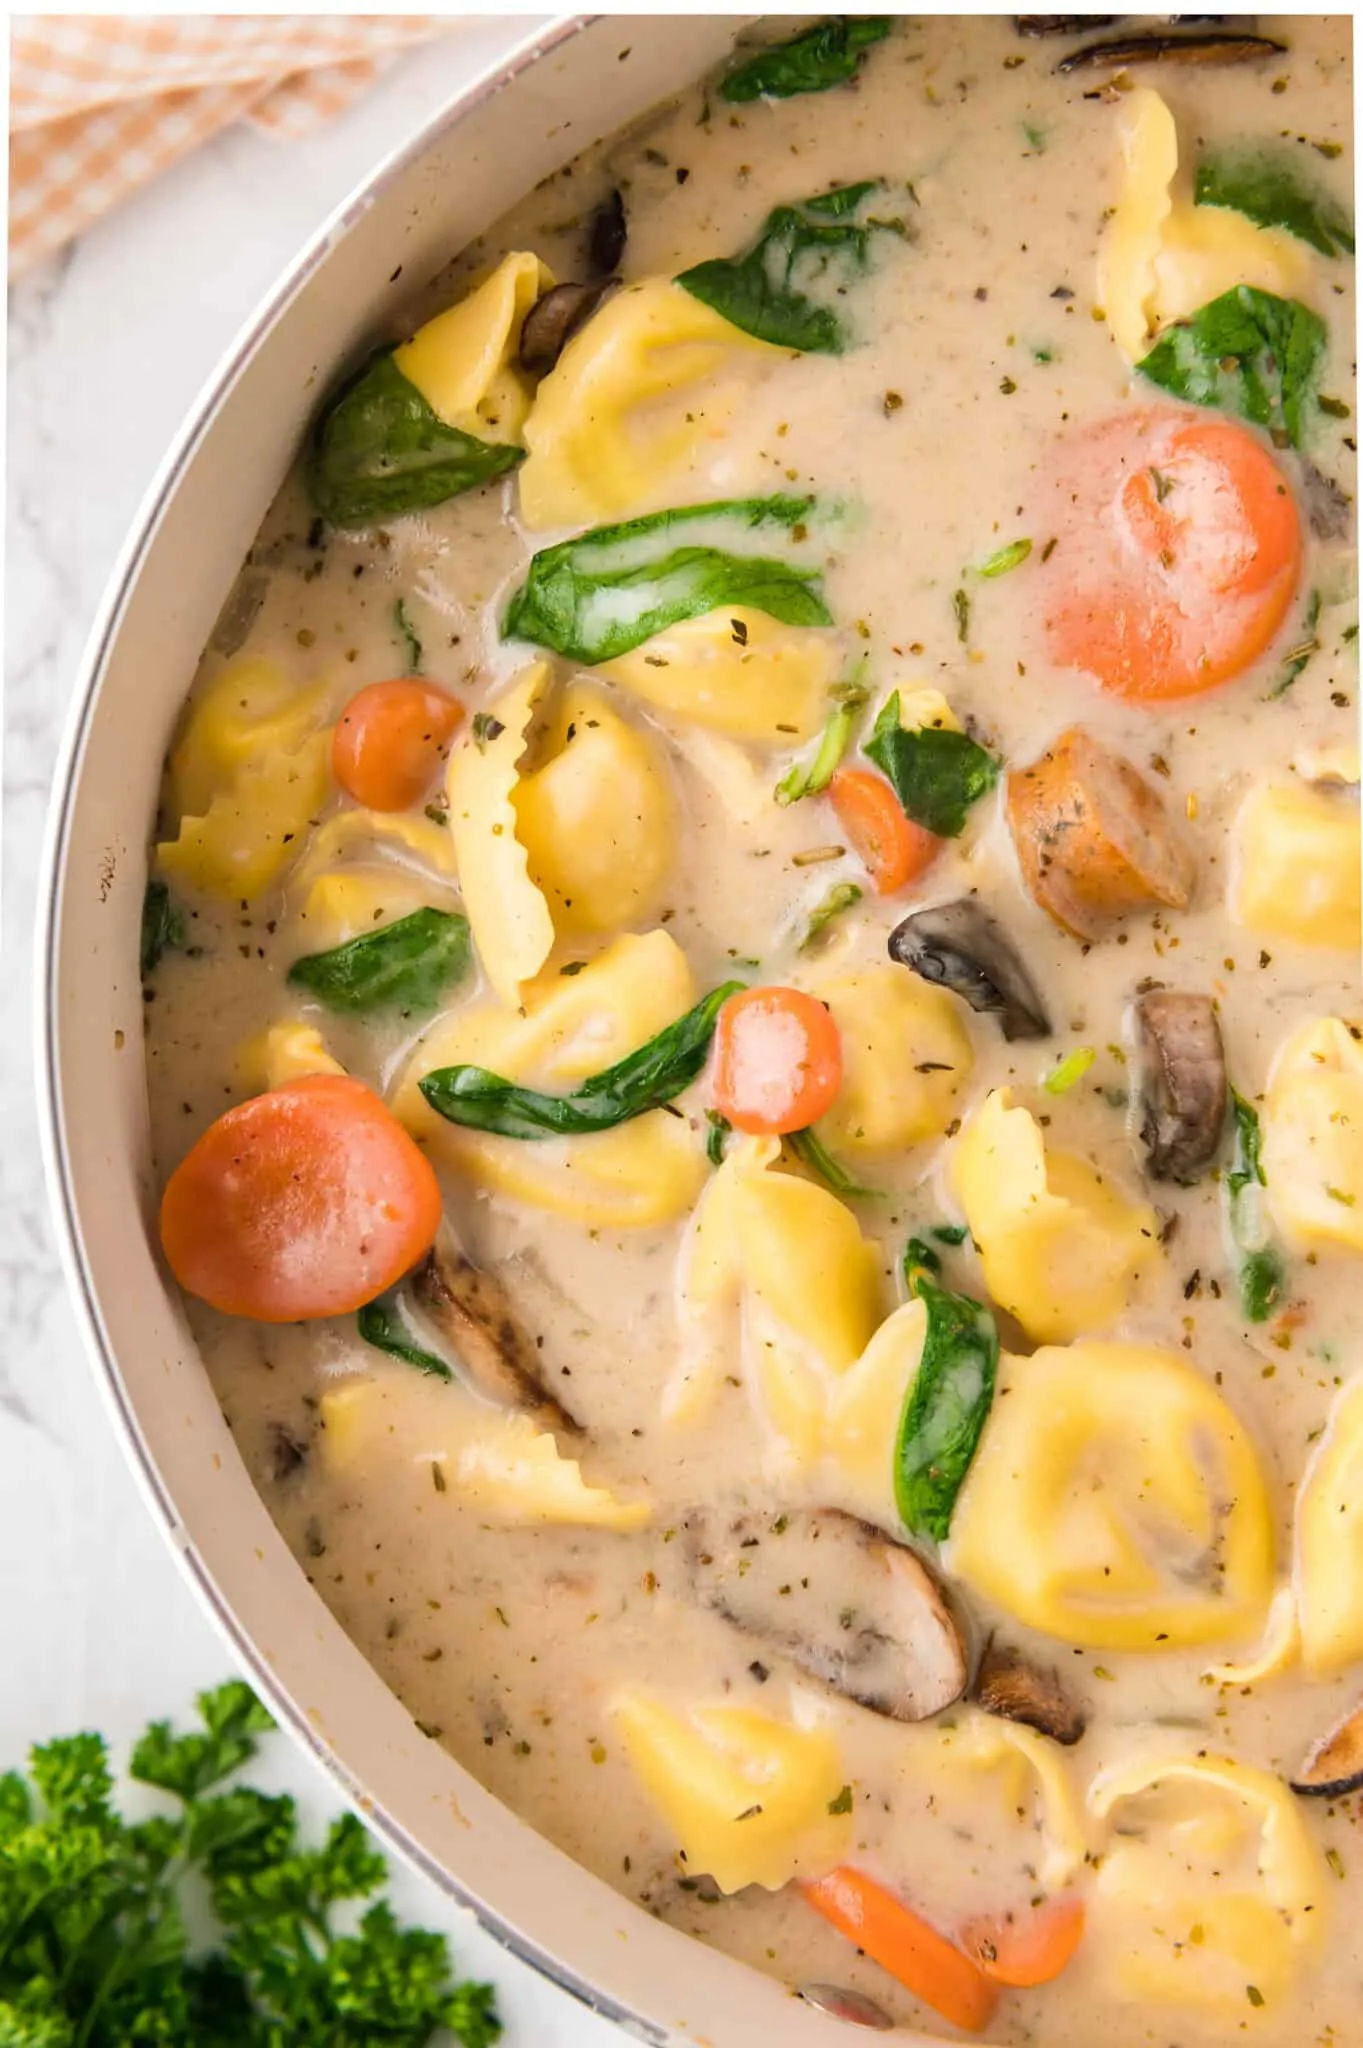 Creamy Tortellini Soup with Sausage is a hearty soup recipe loaded with store bought tortellini, chunks of sausage, mushrooms, carrots and spinach.